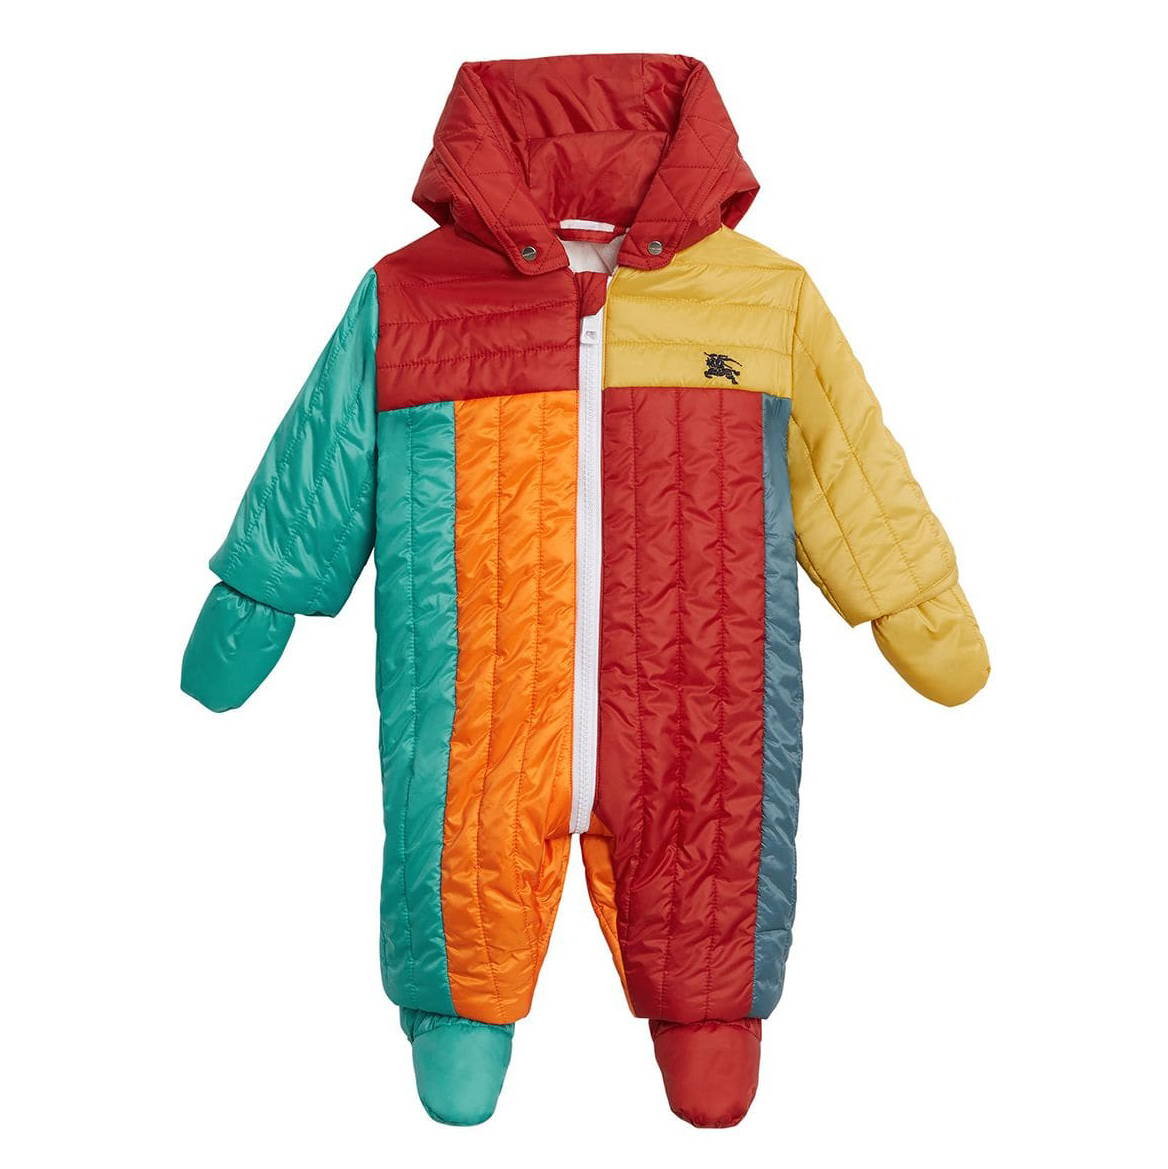 moncler-2 7 Winter Accessories For Babies You Need To Get!